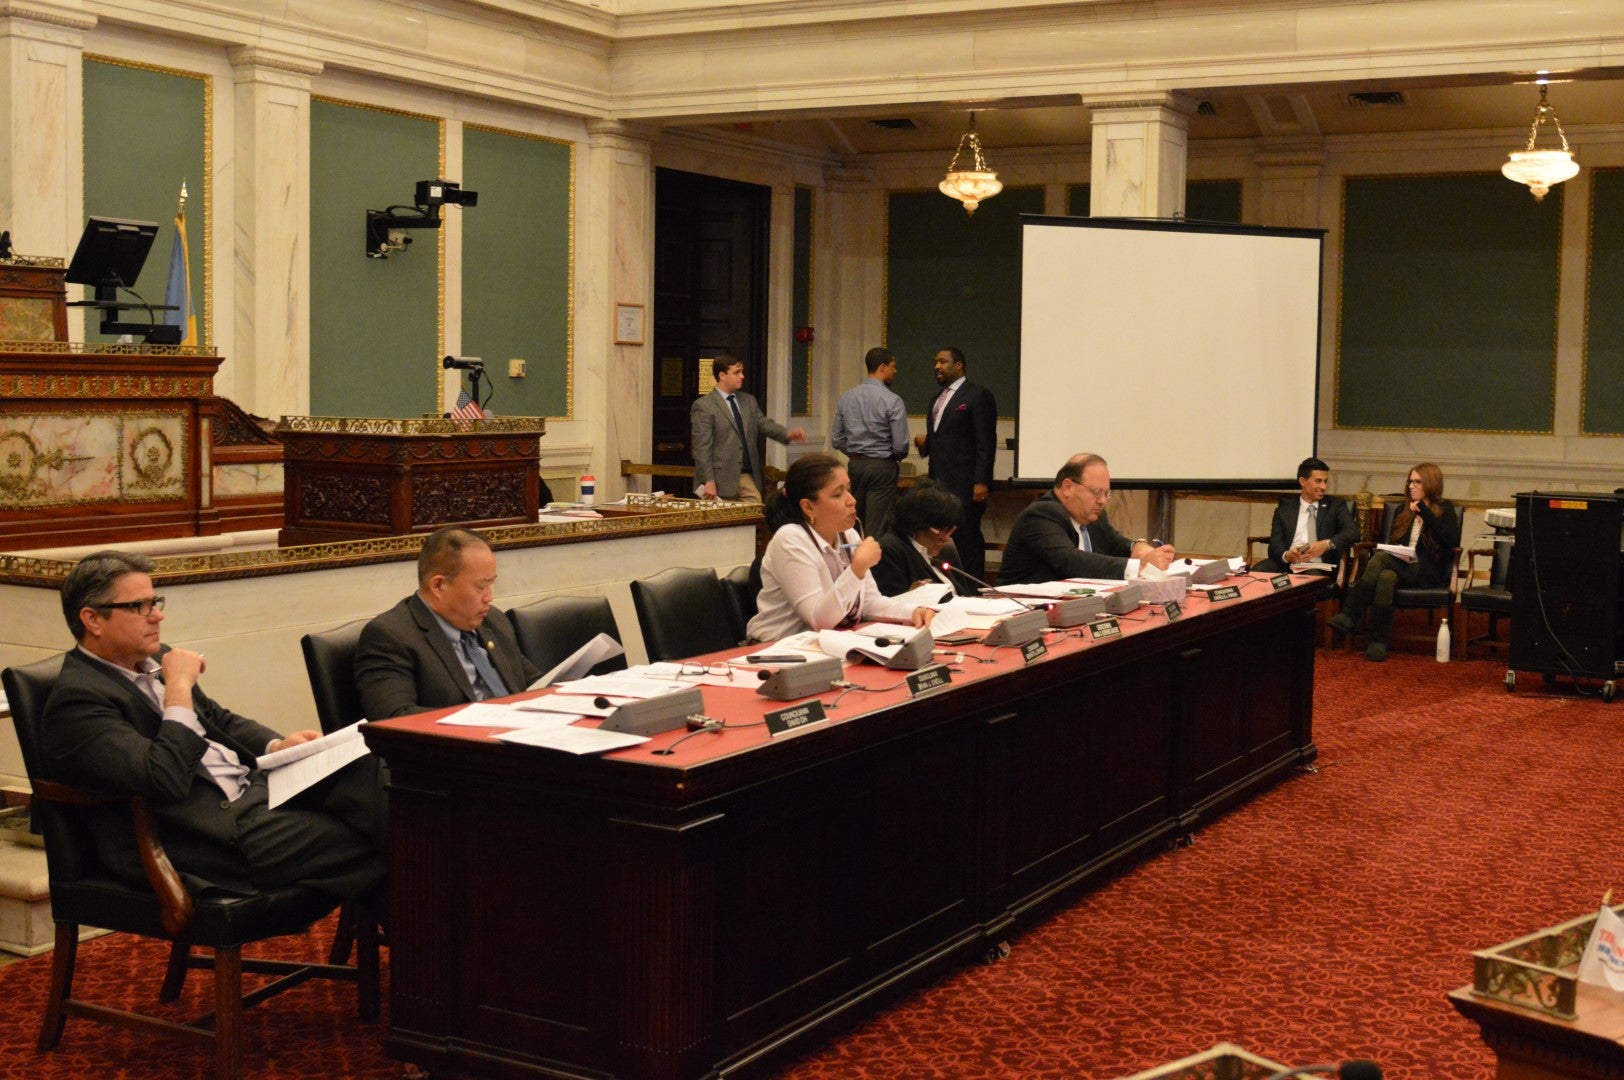 Philadelphia Council members get briefing on projected vote recount costs. (Tom MacDonald / WHYY)